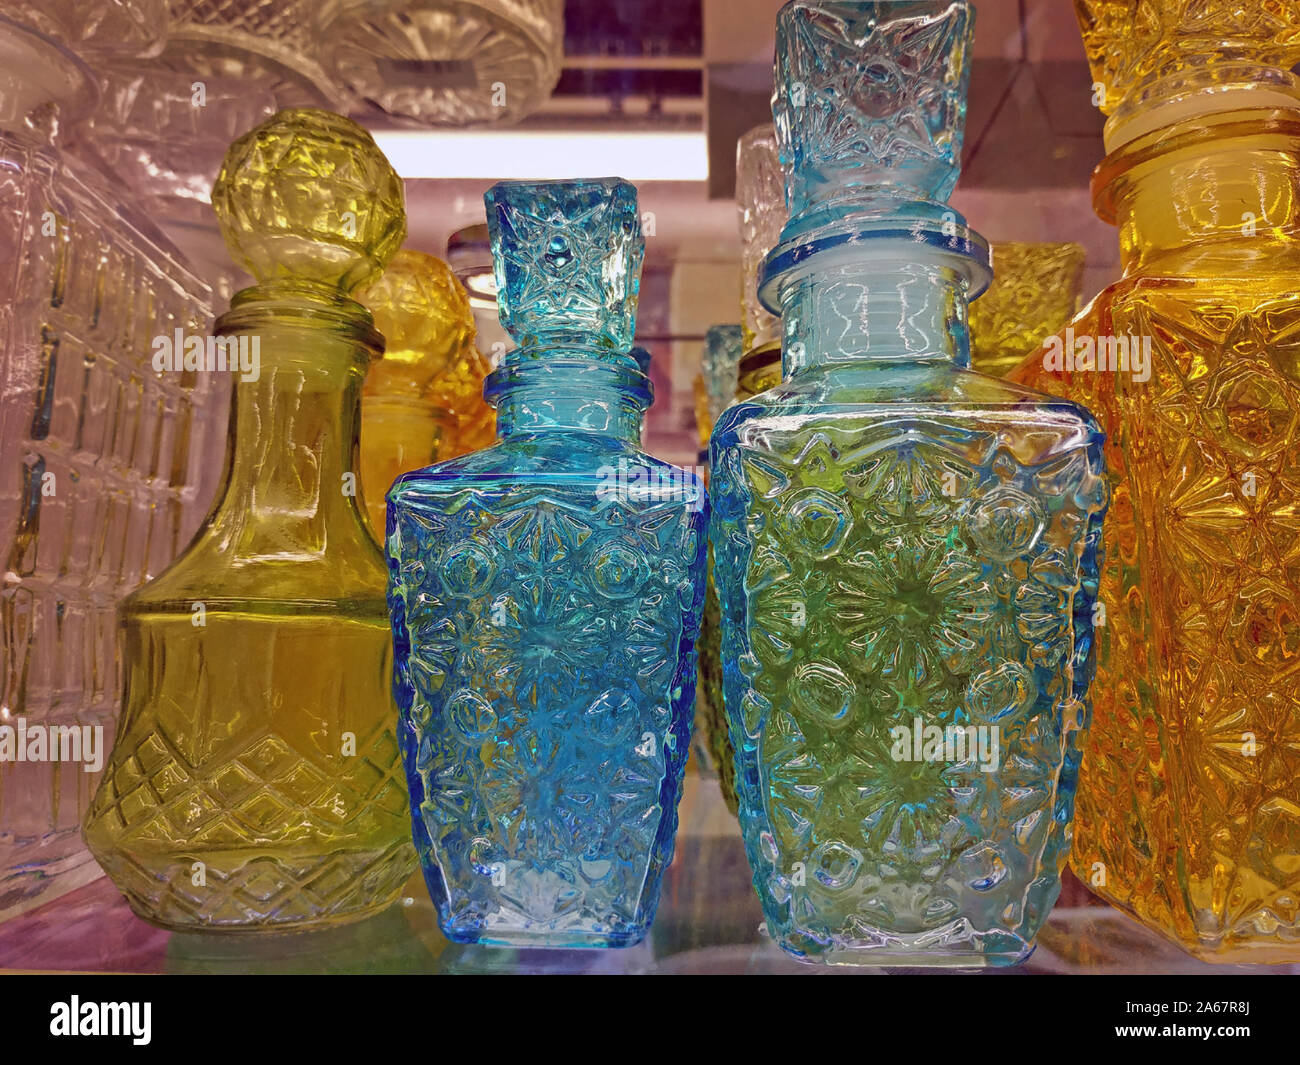 Glass decanters on a store shelf. Yellow and blue glass decanters of various shapes are sold. Bar equipment. Stock Photo